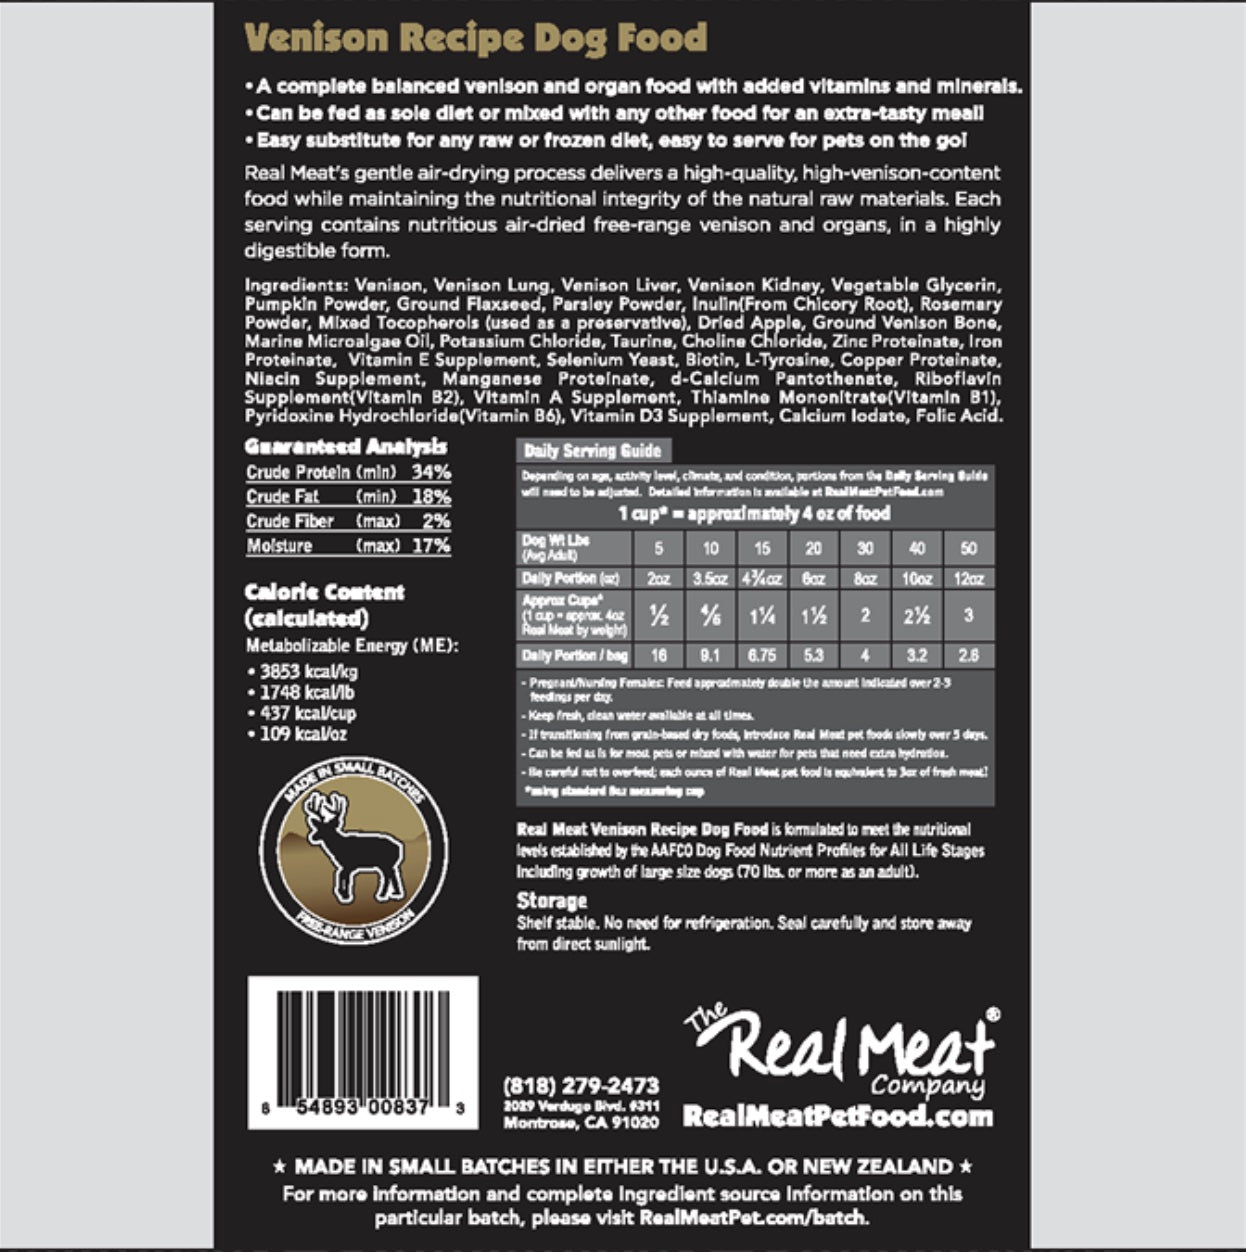 Real Meat Company Dog and Cat Food 5lbs Venison